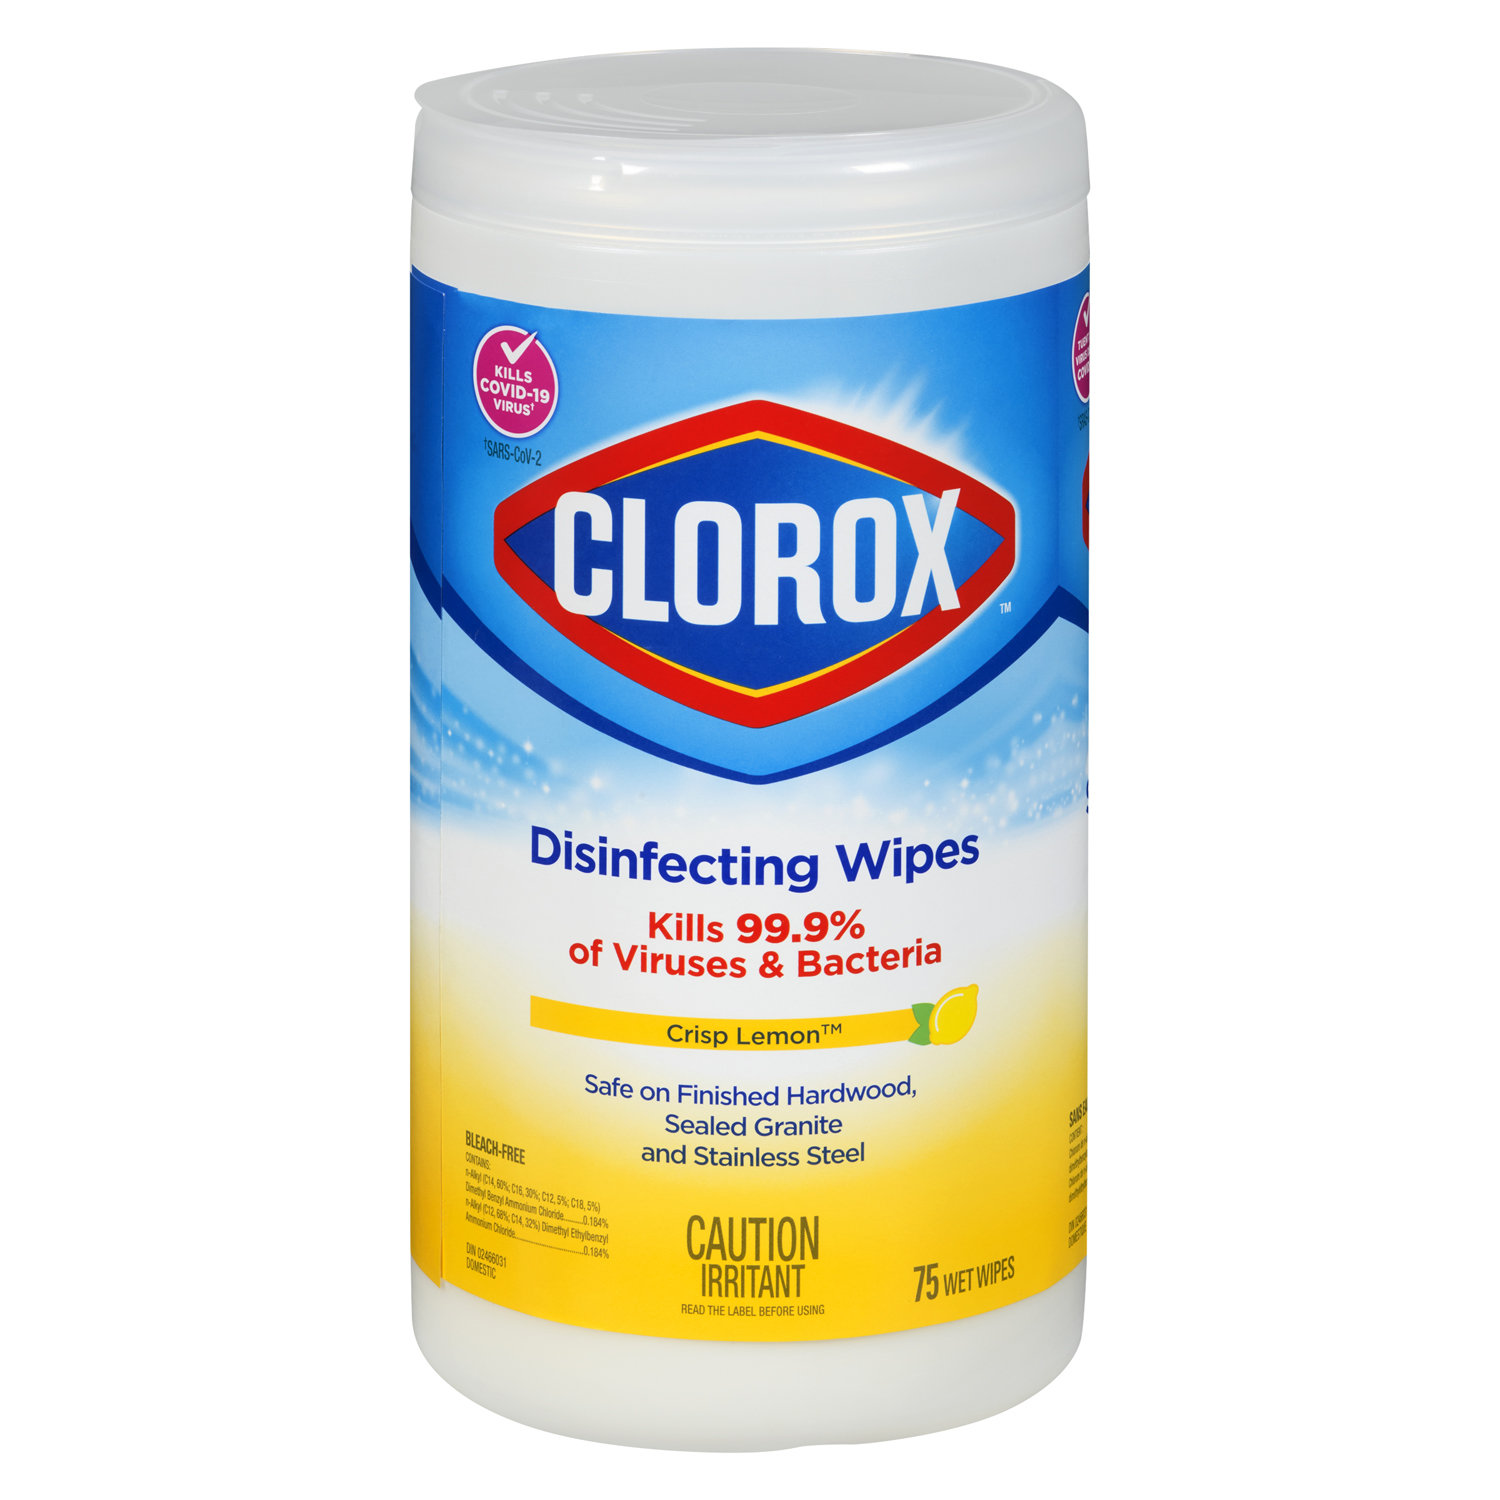 Clorox® Green Works® Cleaning Wipes, Unscented